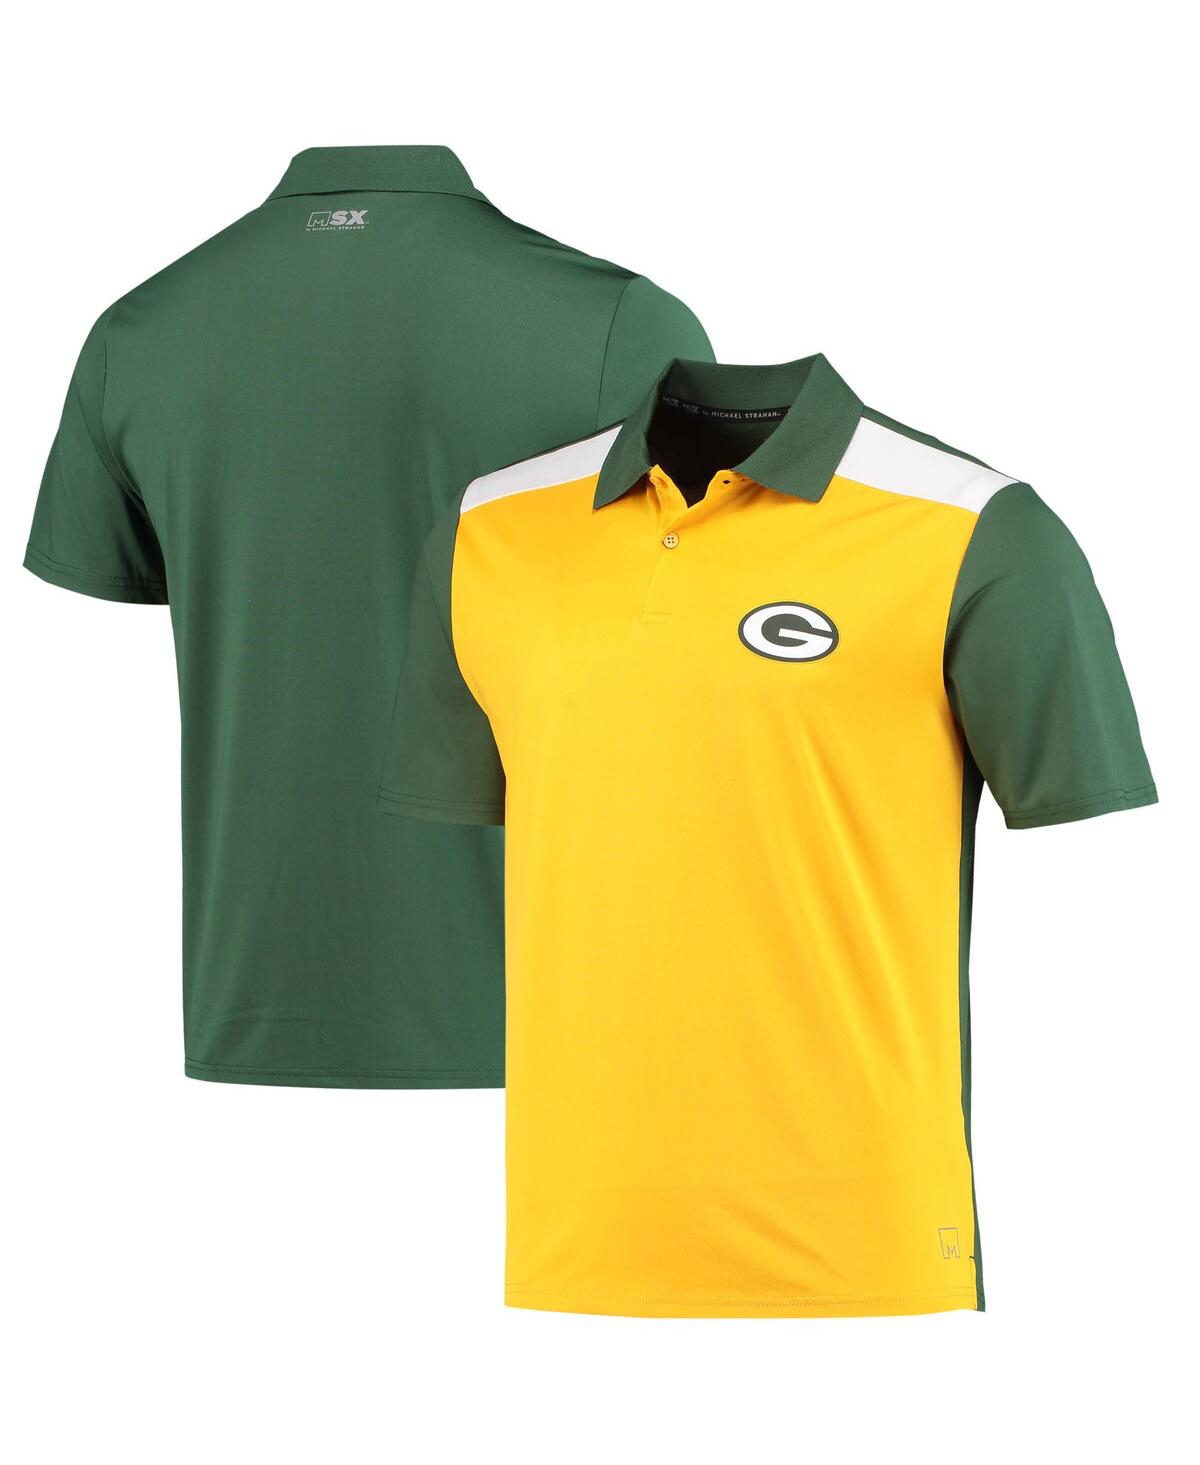 Shop Msx By Michael Strahan Men's  Gold, Green Green Bay Packers Challenge Color Block Performance Polo Sh In Gold,green